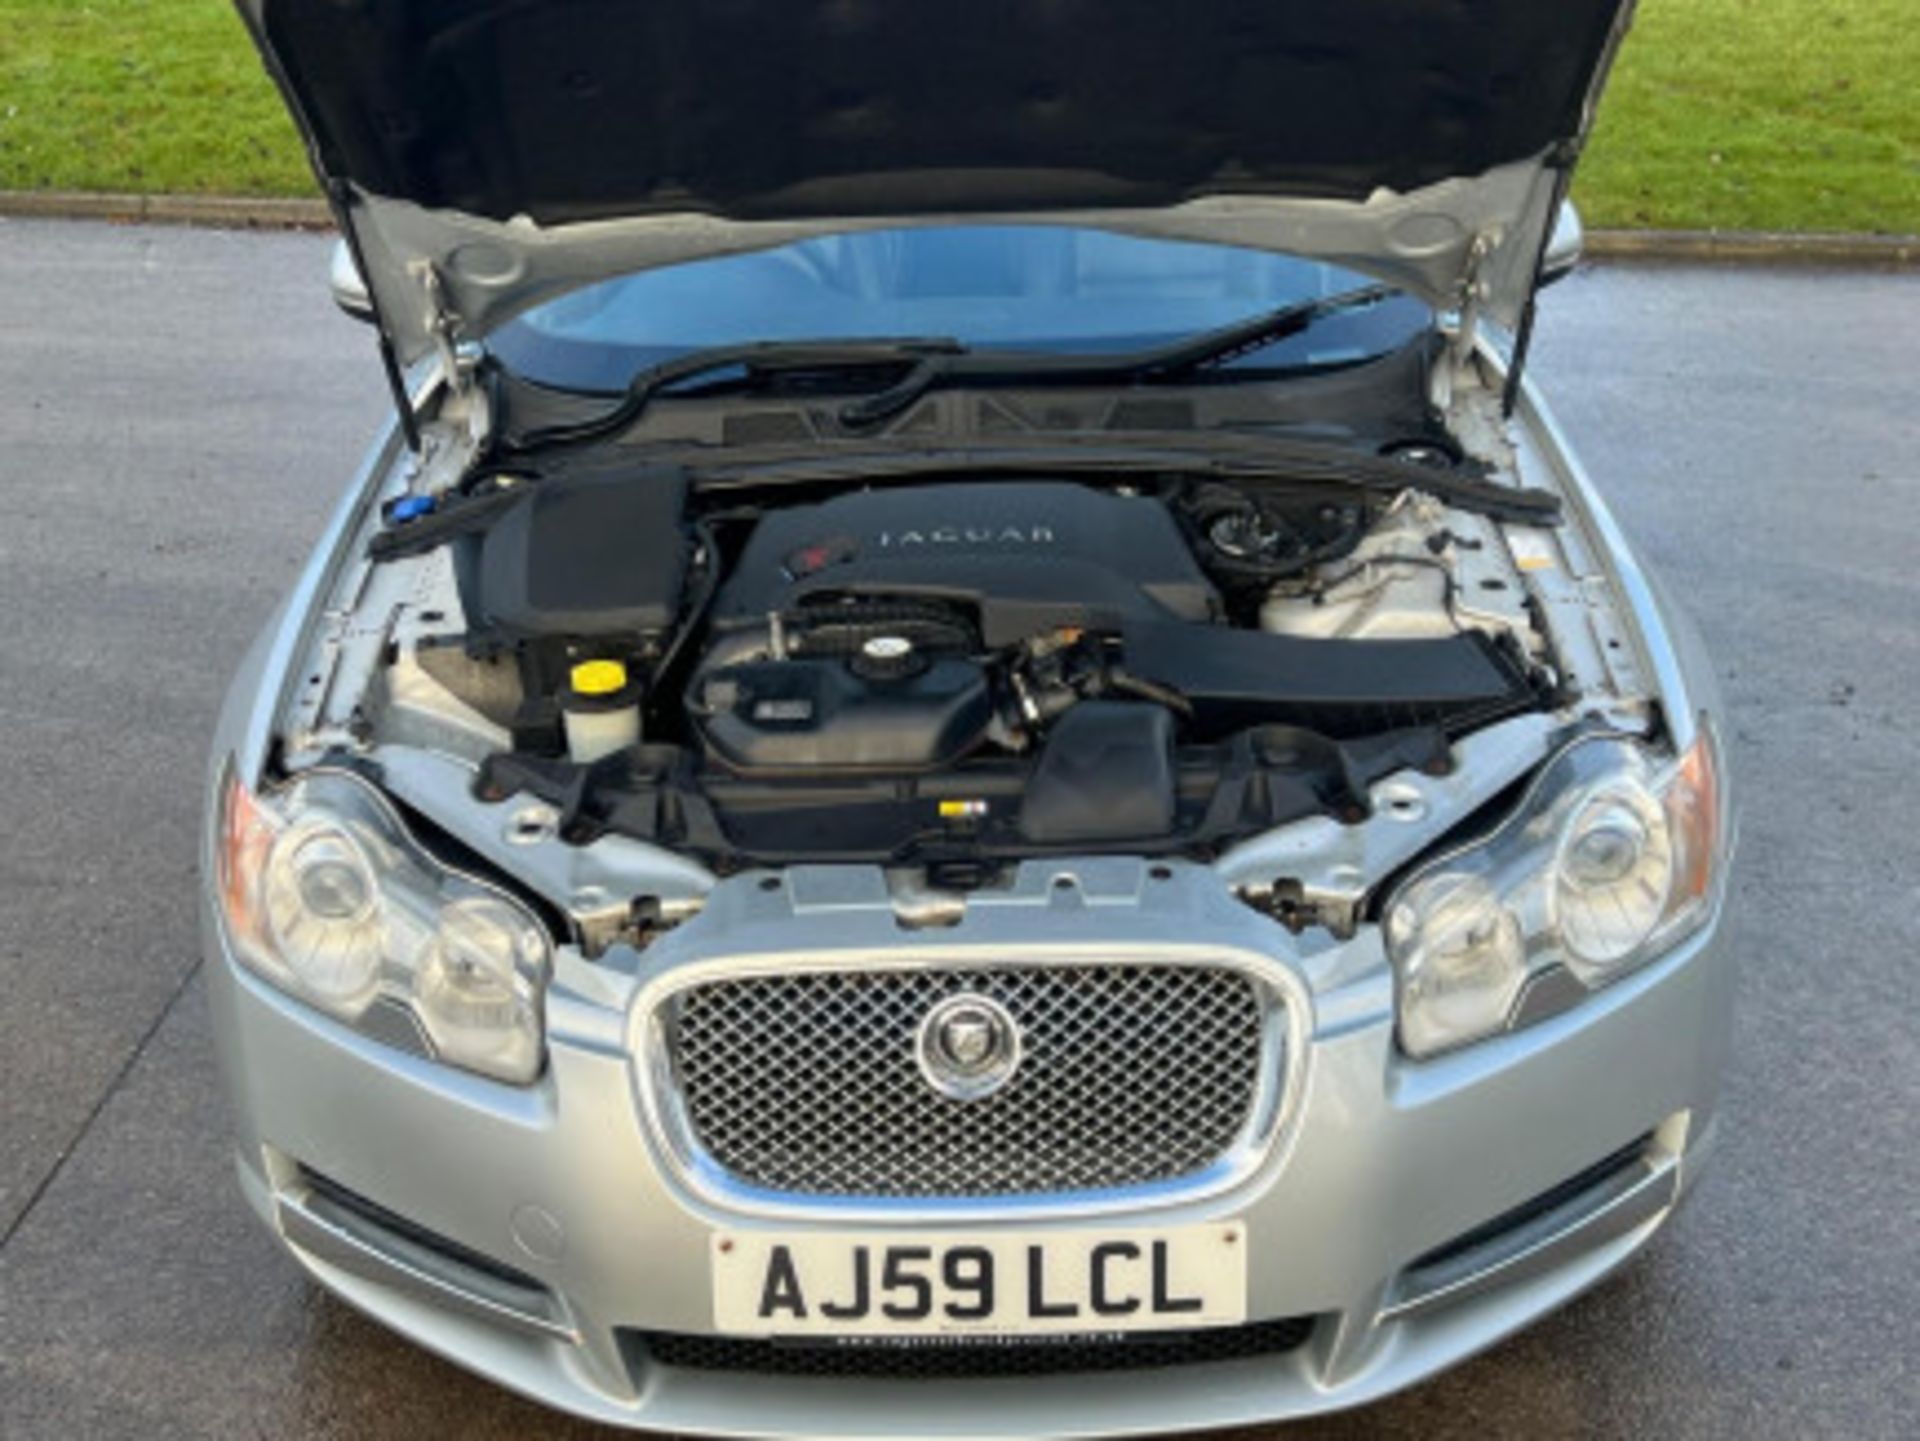 LUXURIOUS JAGUAR XF 3.0D V6 LUXURY 4DR AUTOMATIC SALOON >>--NO VAT ON HAMMER--<< - Image 41 of 80